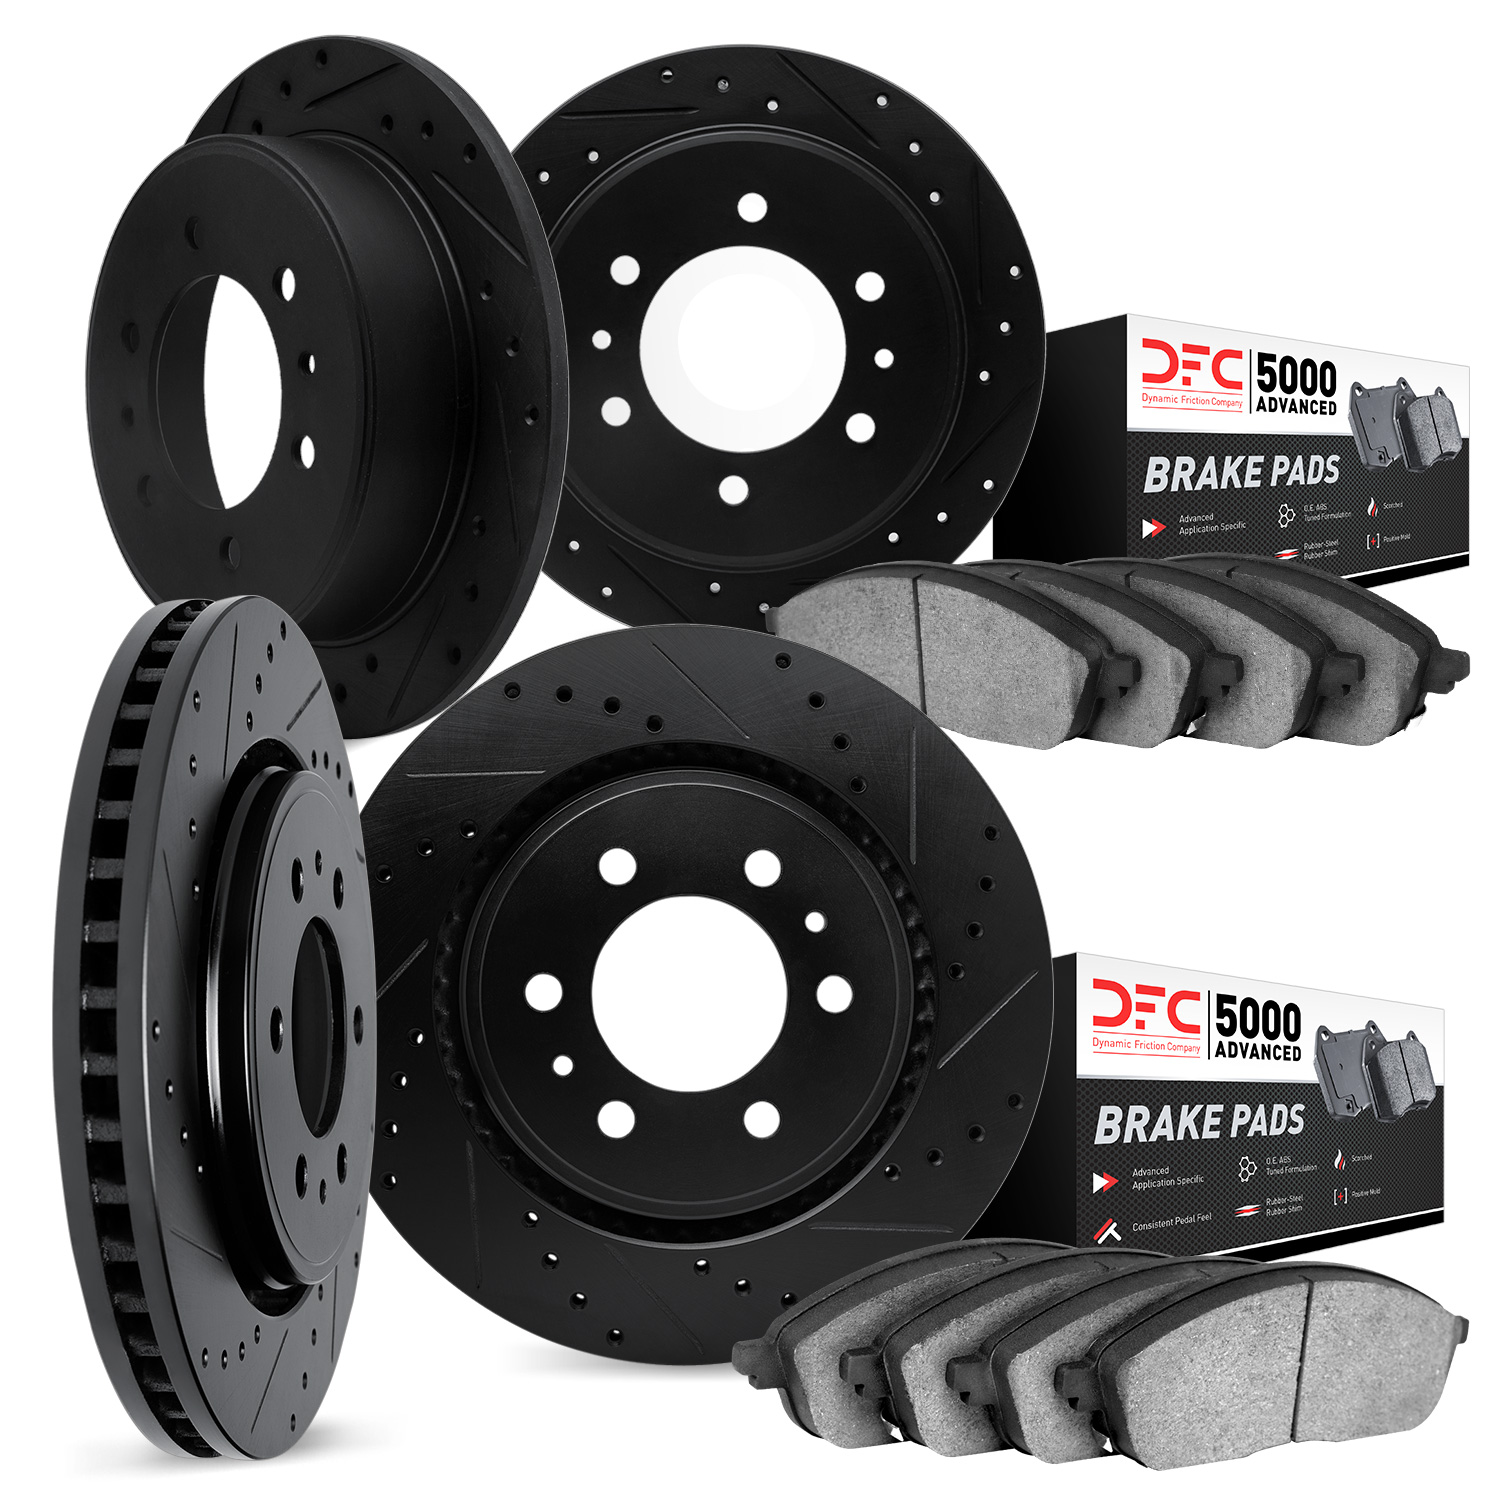 8504-40234 Drilled/Slotted Brake Rotors w/5000 Advanced Brake Pads Kit [Black], Fits Select Multiple Makes/Models, Position: Fro